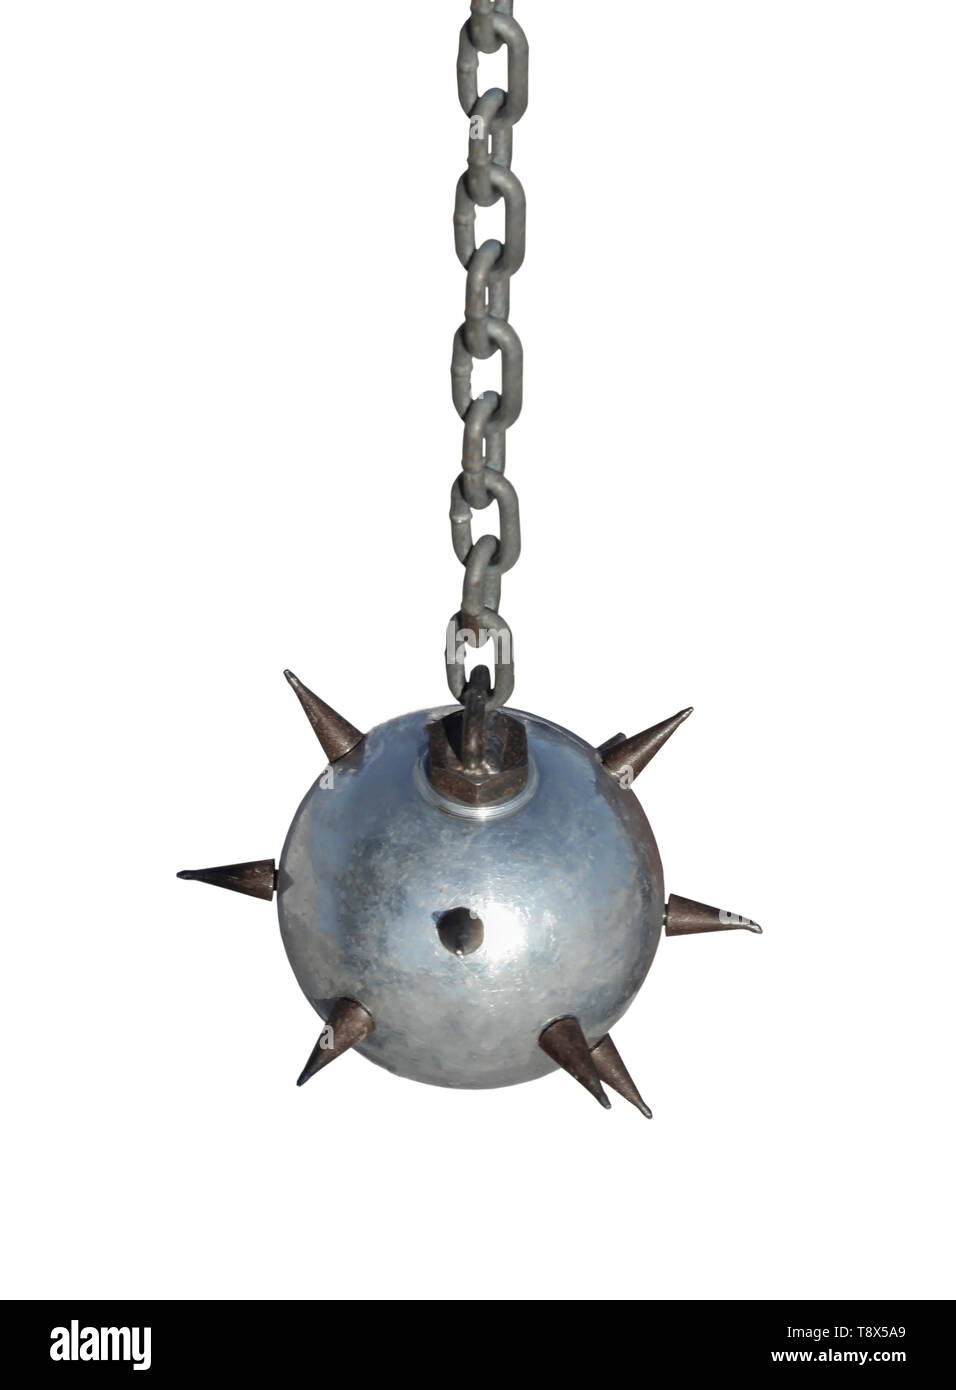 https://c8.alamy.com/comp/T8X5A9/melee-weapons-heavy-iron-ball-with-spikes-on-a-chain-T8X5A9.jpg